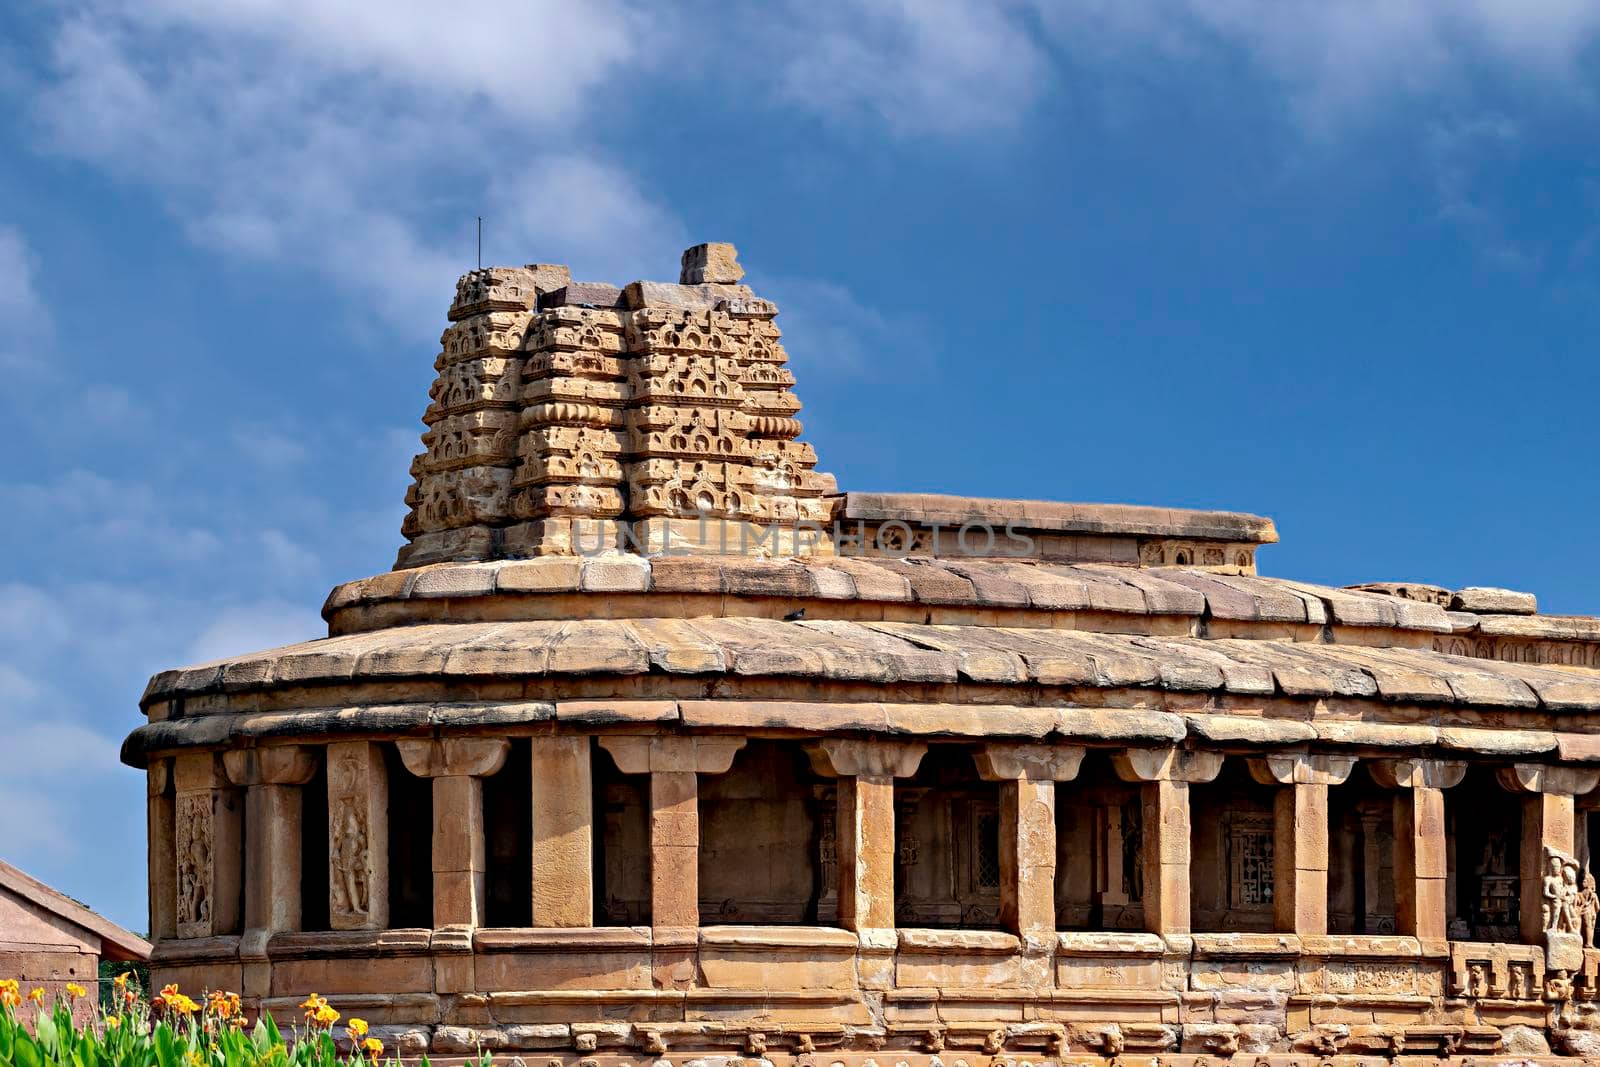 Durga temple in Aihole, Karnataka, India with nice blue color sky background. by lalam